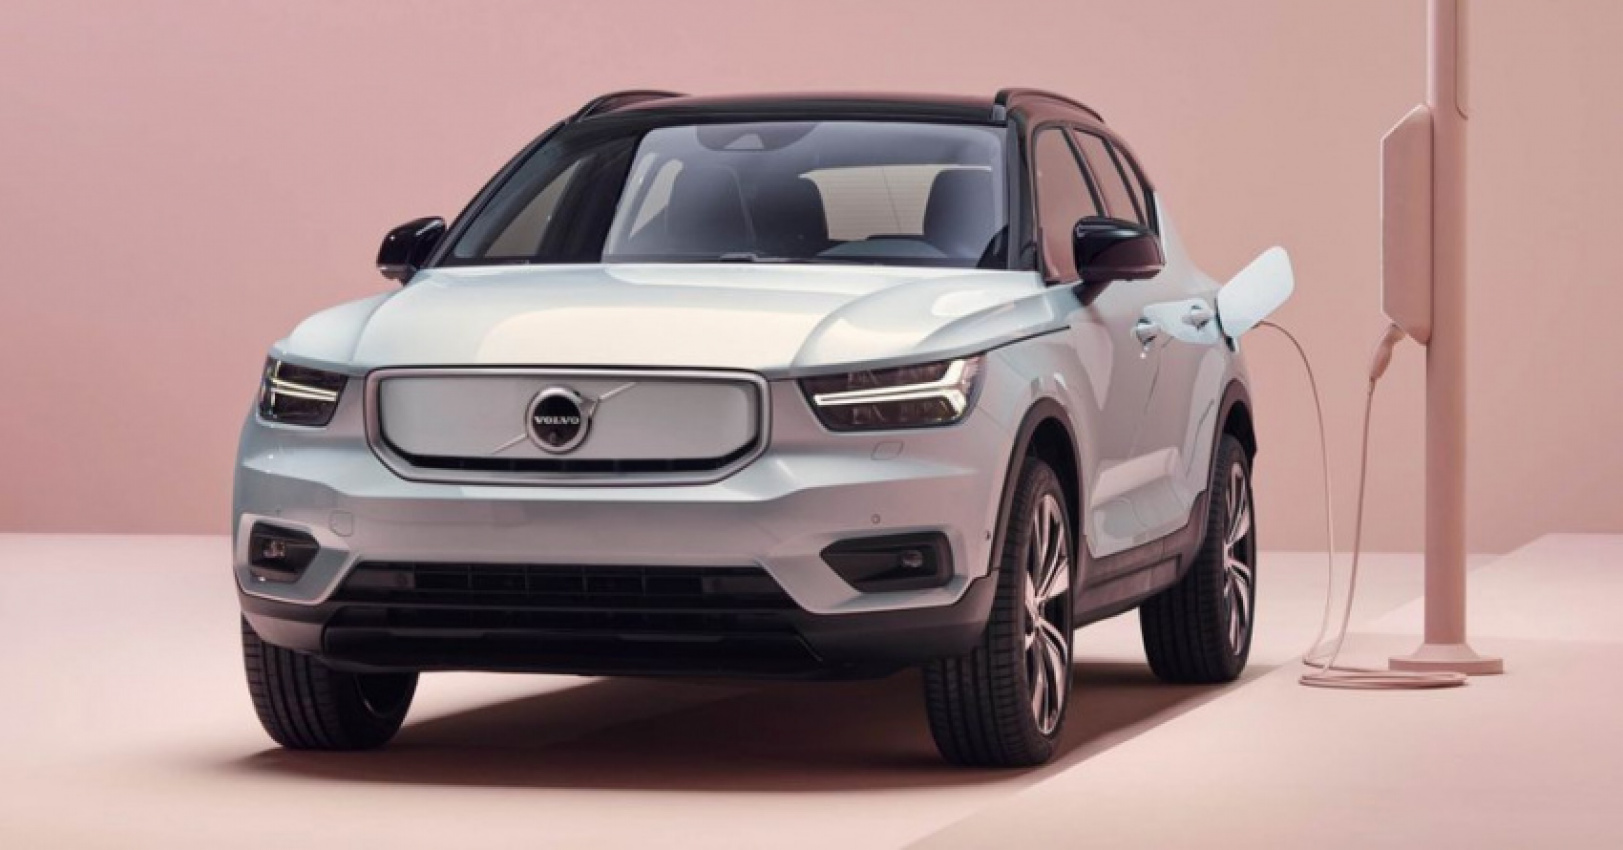 autos, cars, volvo, auto news, volvo car malaysia, volvo malaysia, volvo malaysia sales 2021, volvo s60 phev, volvo t8, volvo v60, volvo wagon malaysia, volvo xc40 ev, v60 wagon teased on volvo car malaysia social media - can it help bring them another year of strong sales?